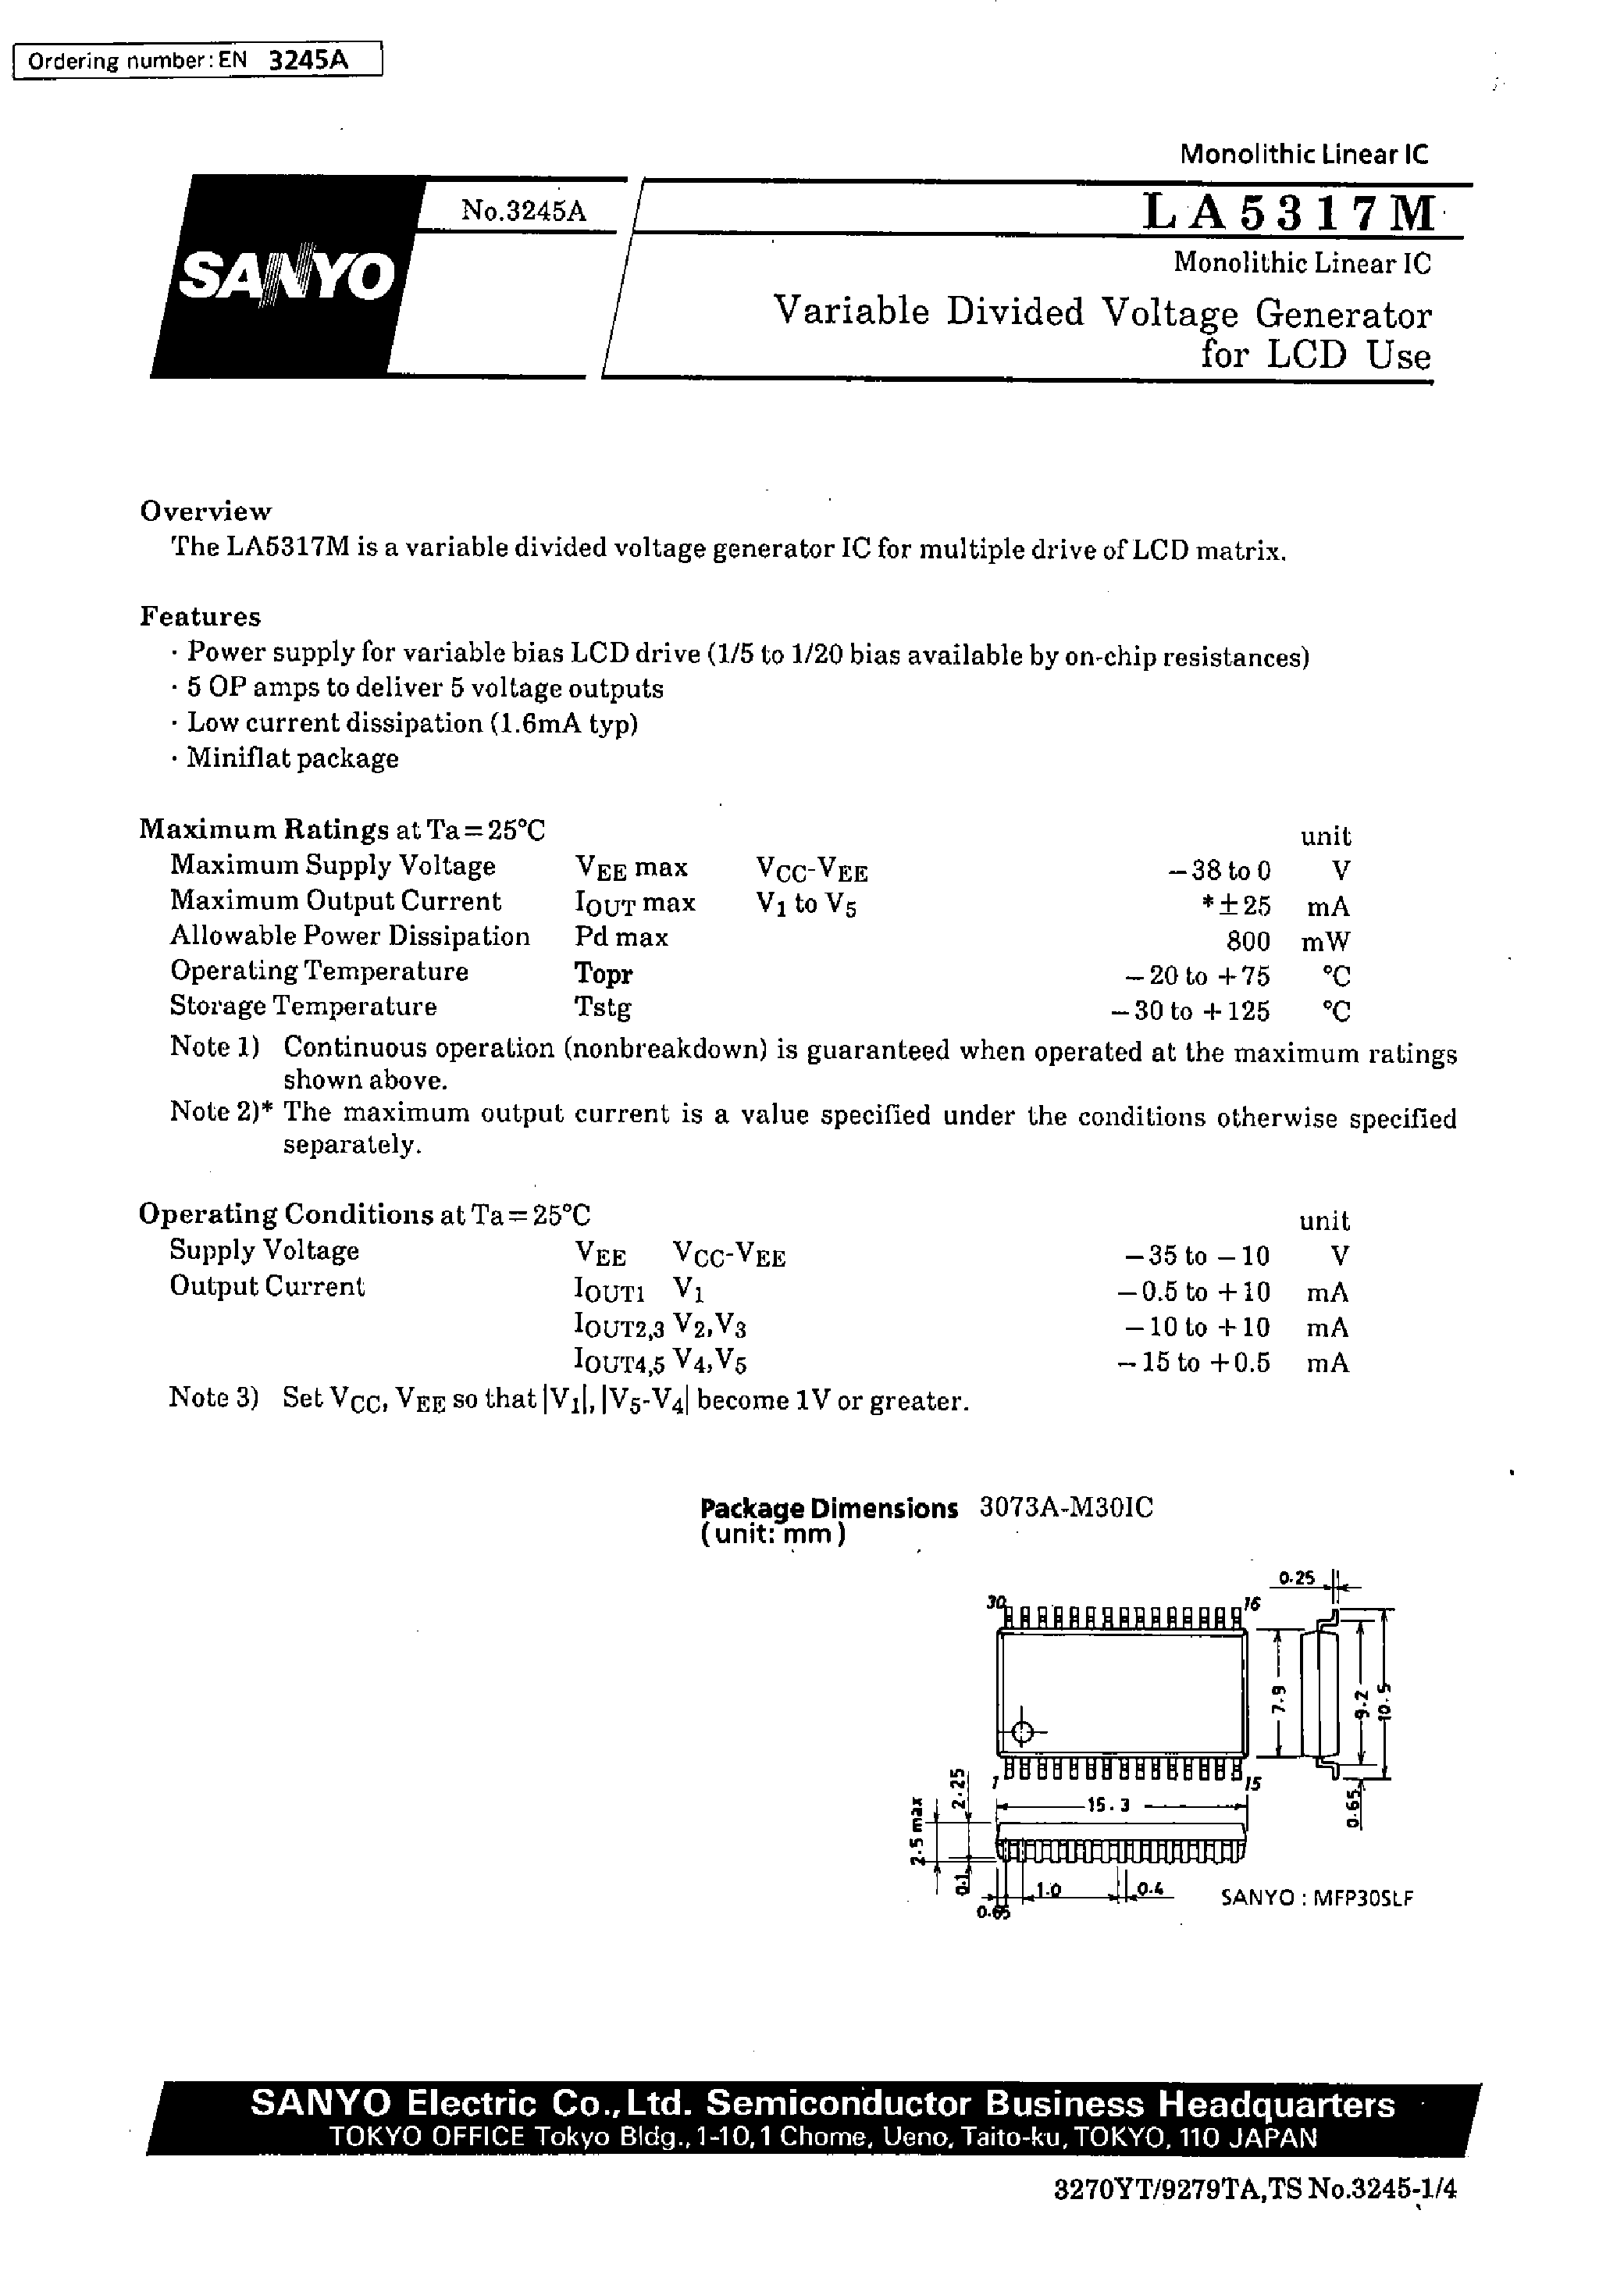 Datasheet LA5317M - Variable Divided Voltage Generator for LCD Use page 1